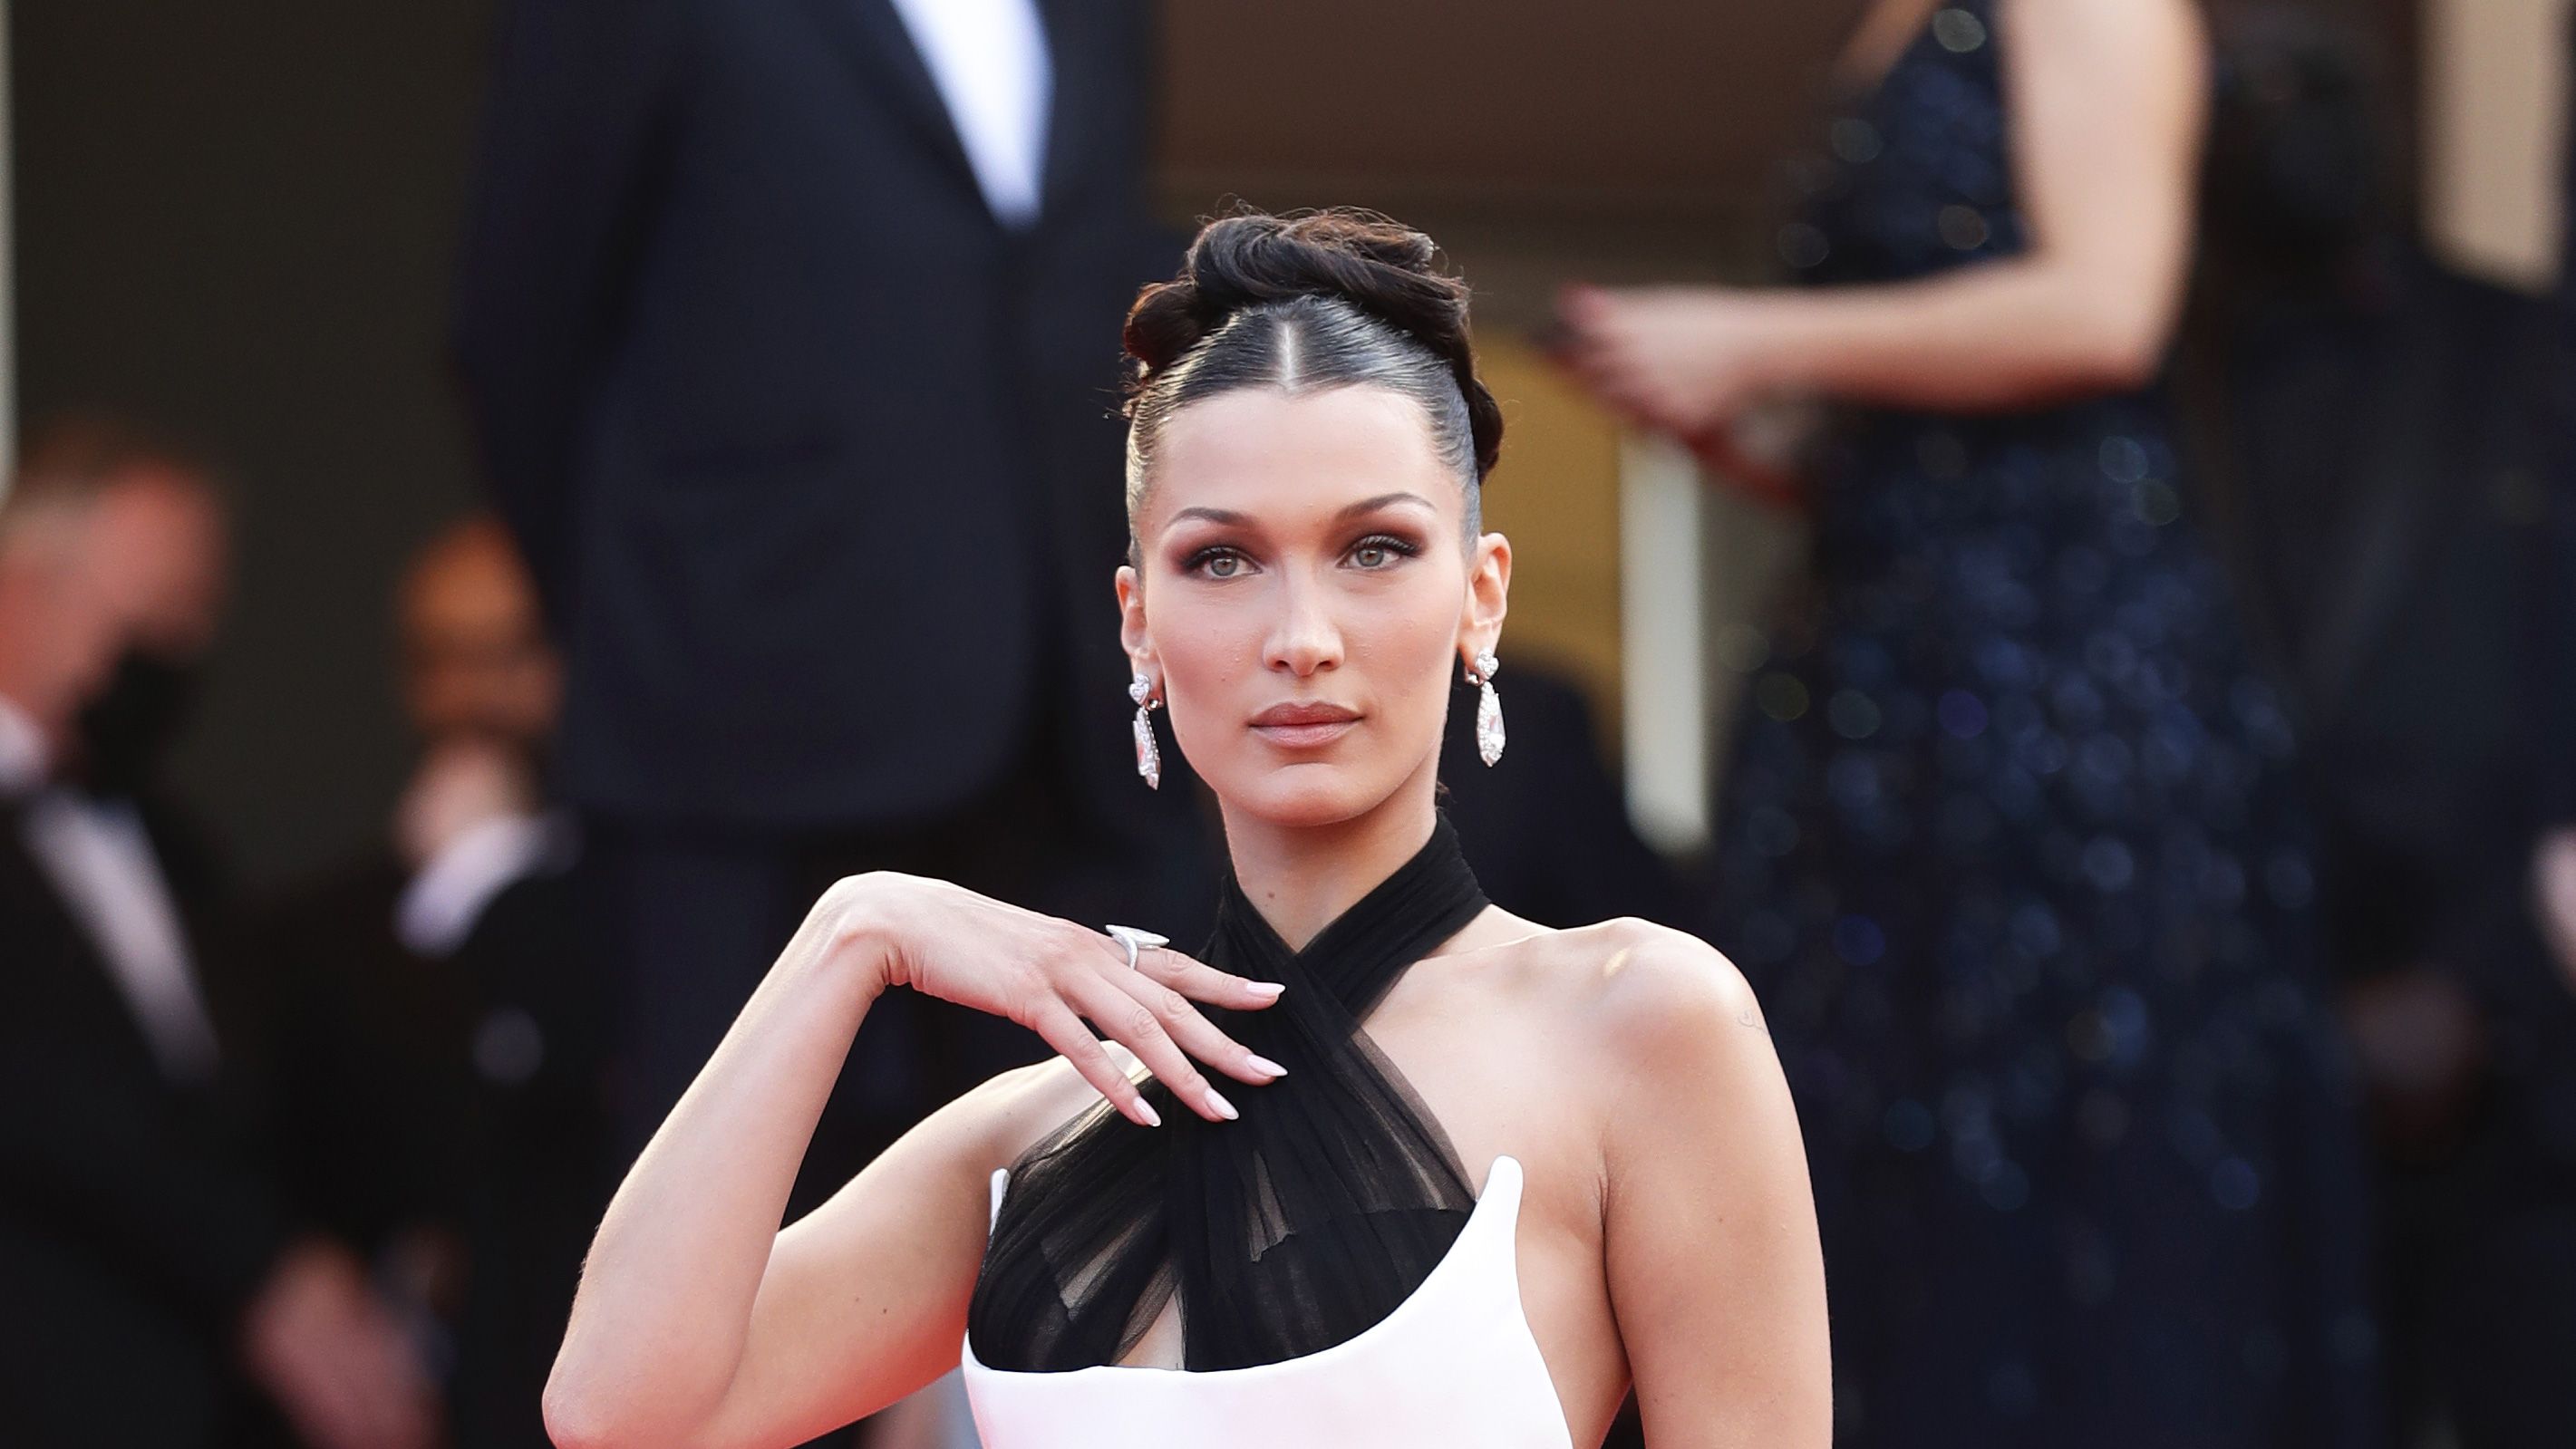 Bella Hadid Has a Princess Moment in a Bold Ball Gown at Cannes